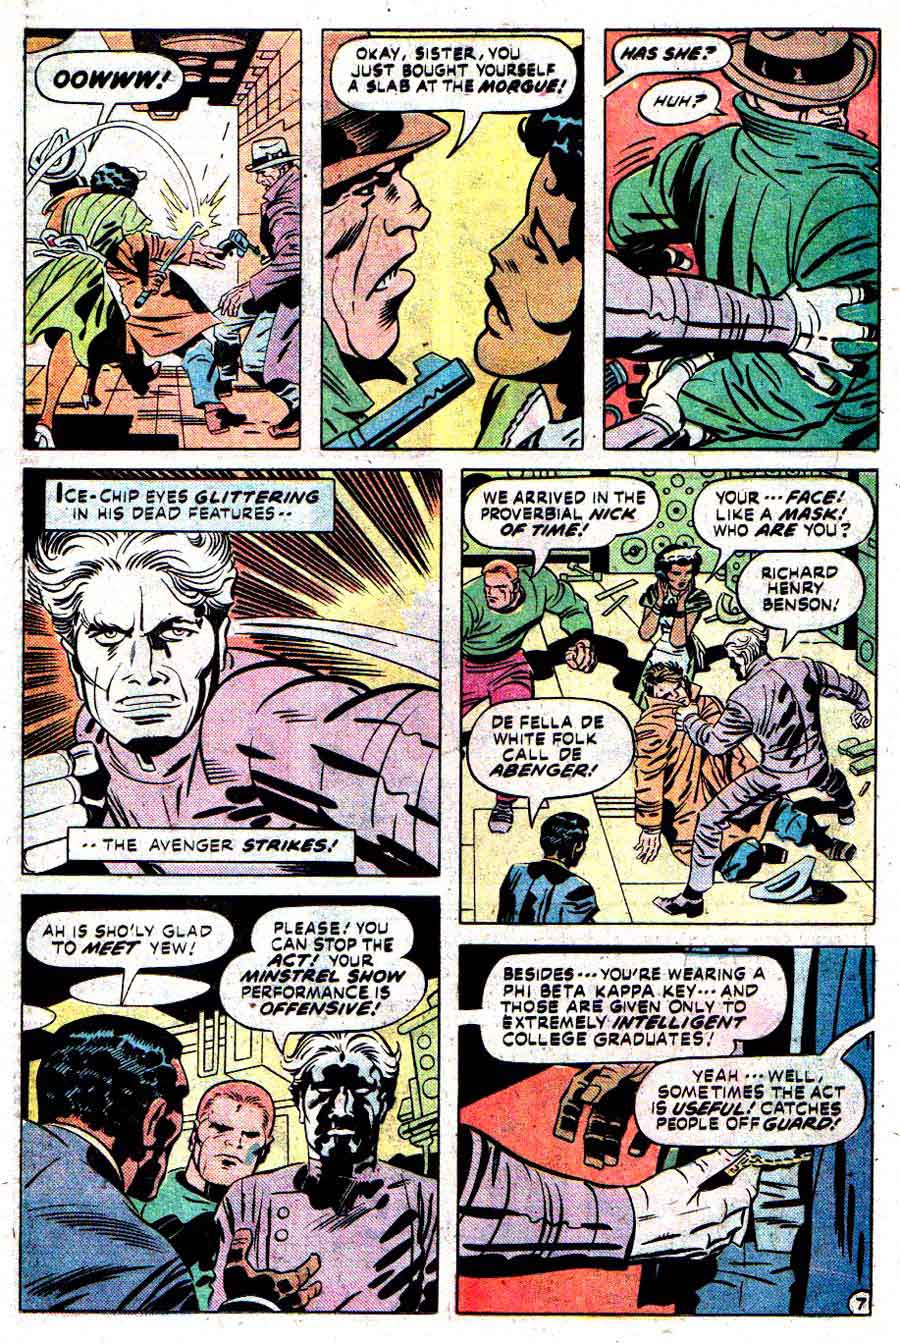 Justice Inc. v1 #2 dc bronze age comic book page art by Jack Kirby